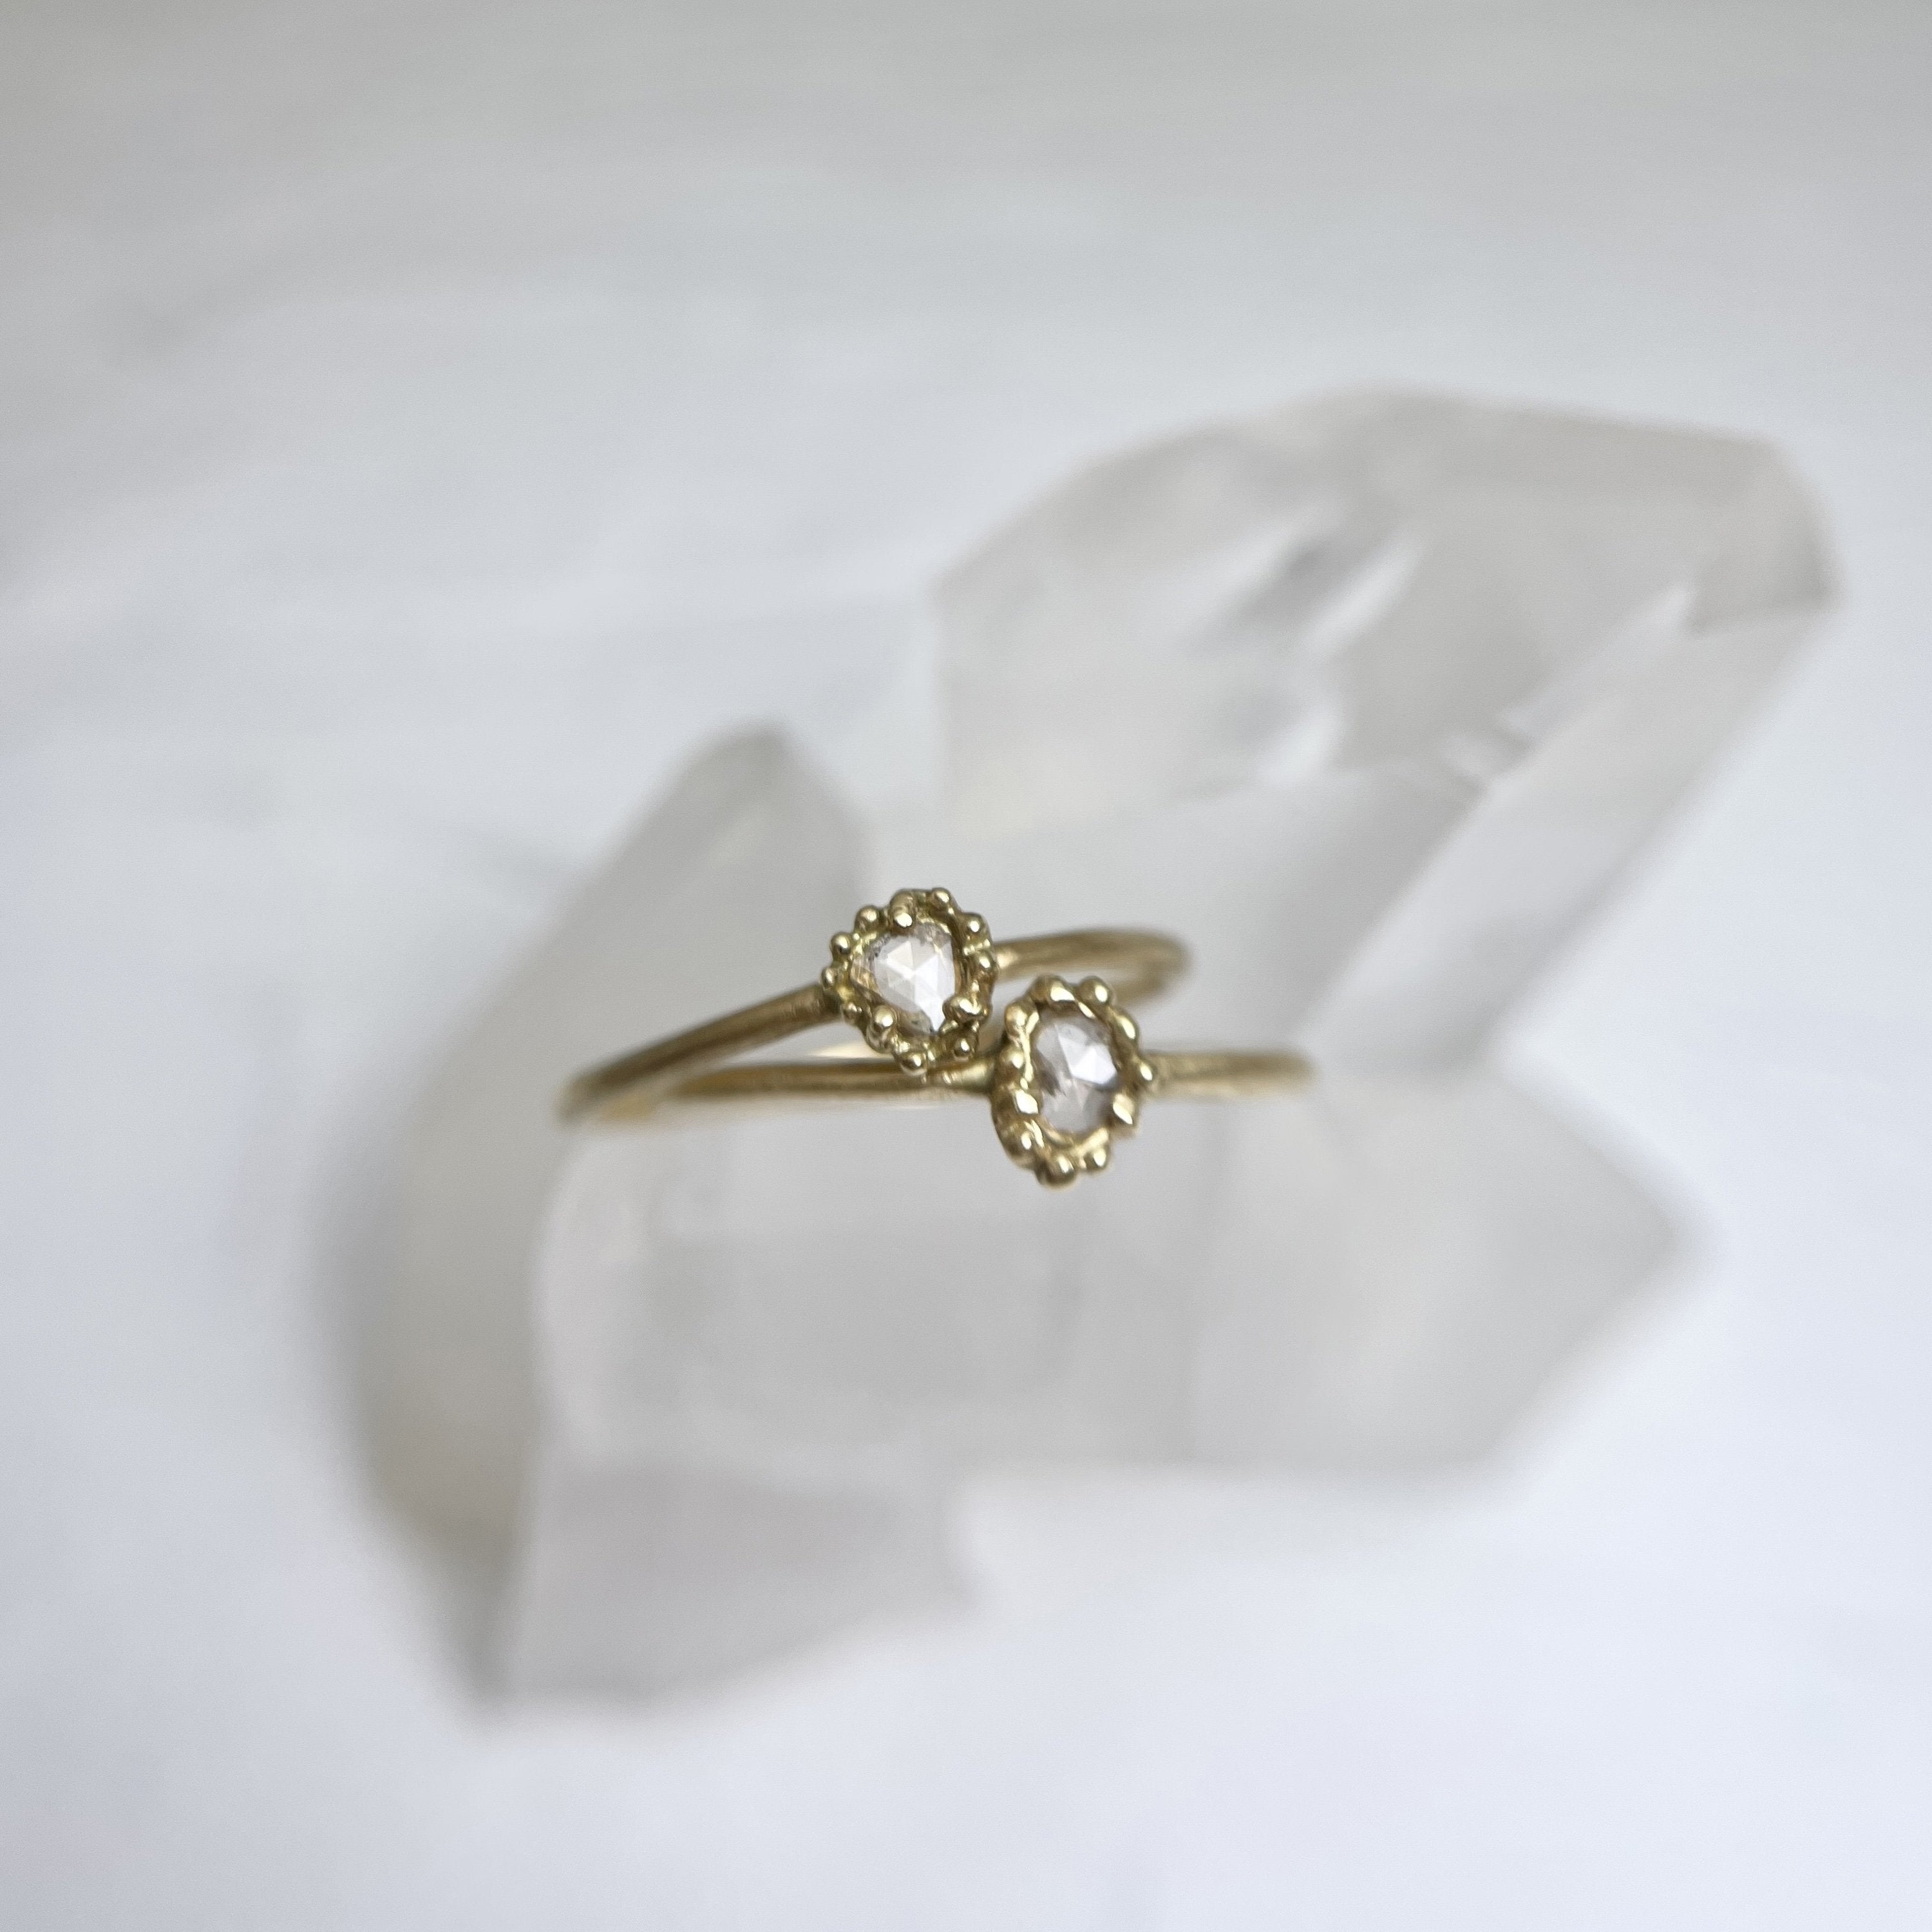 Light Brown Rose Cut Diamond Ring Surrounded by Handmade Dots (18k)